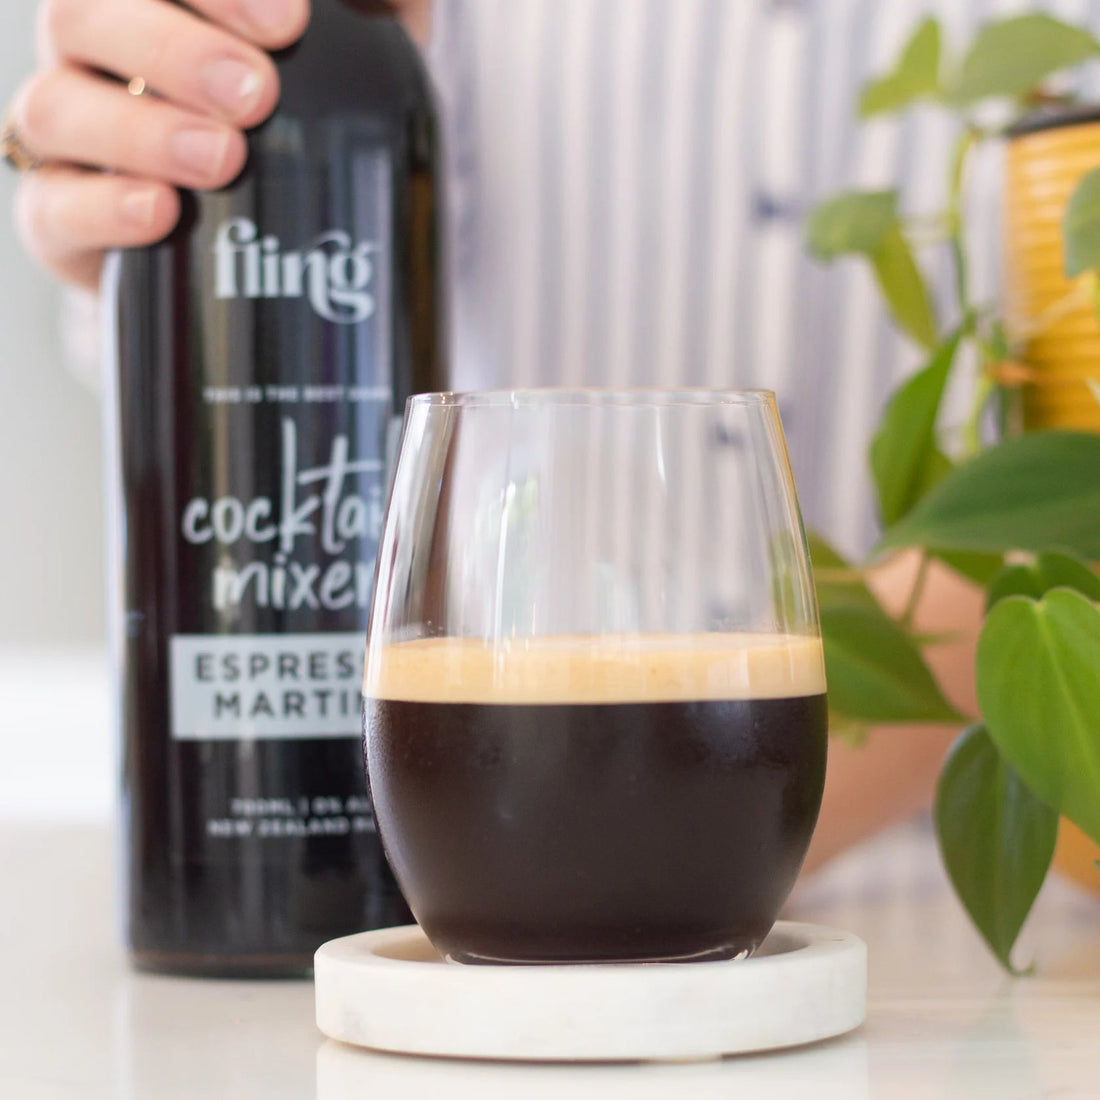 Fling Cocktails - Espresso Martini Mixer - The Flower Crate